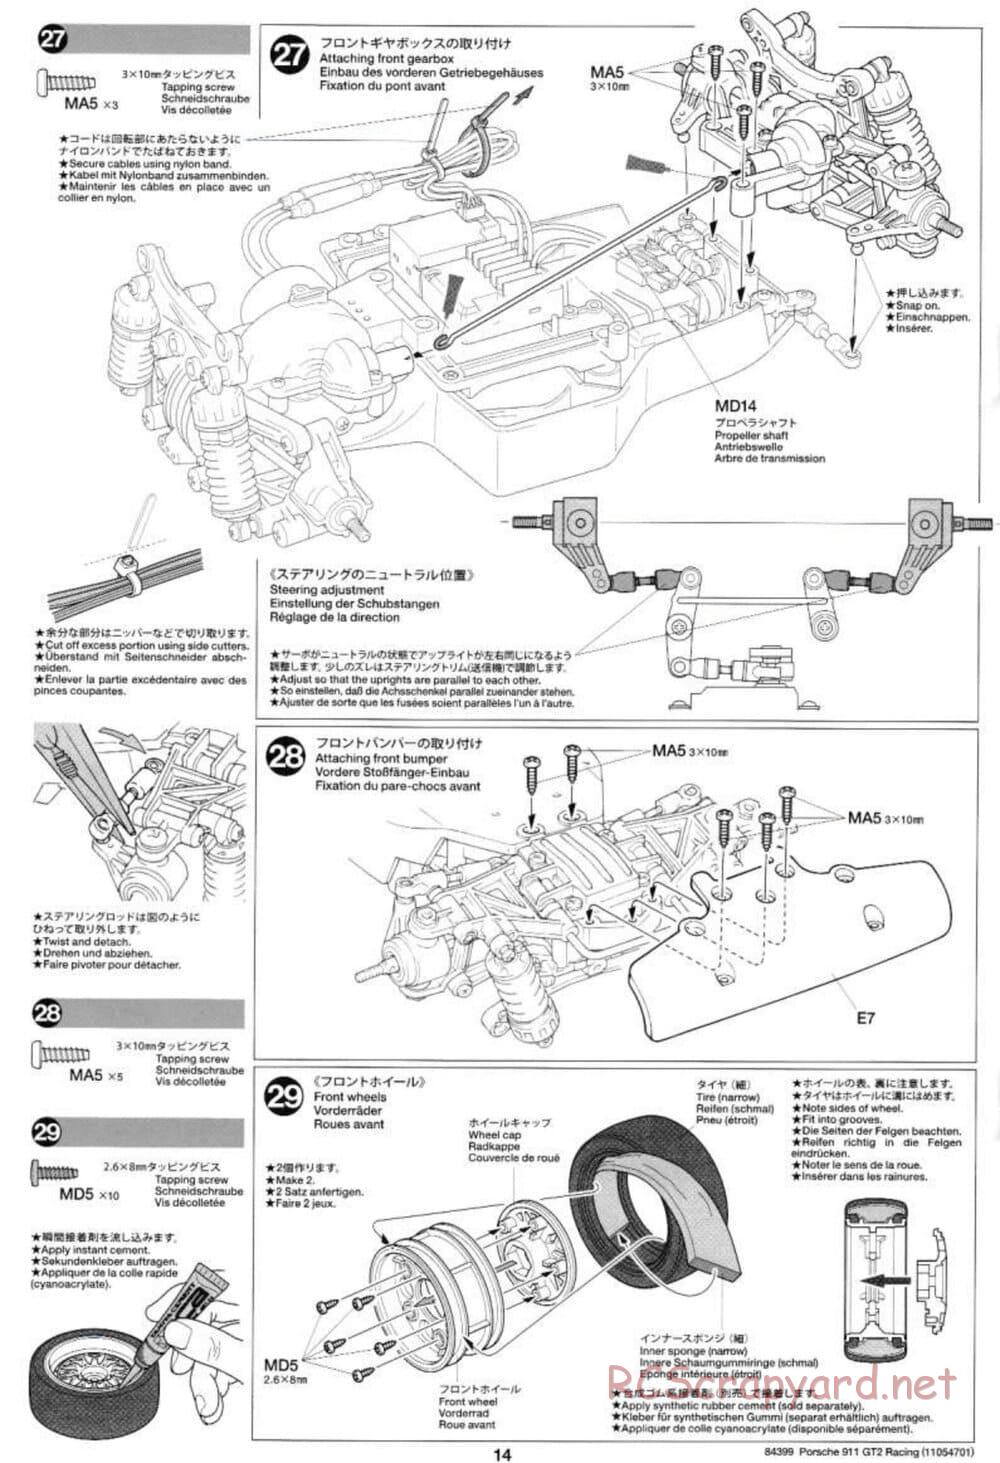 Tamiya - Porsche 911 GT2 Racing - TA02SW Chassis - Manual - Page 14